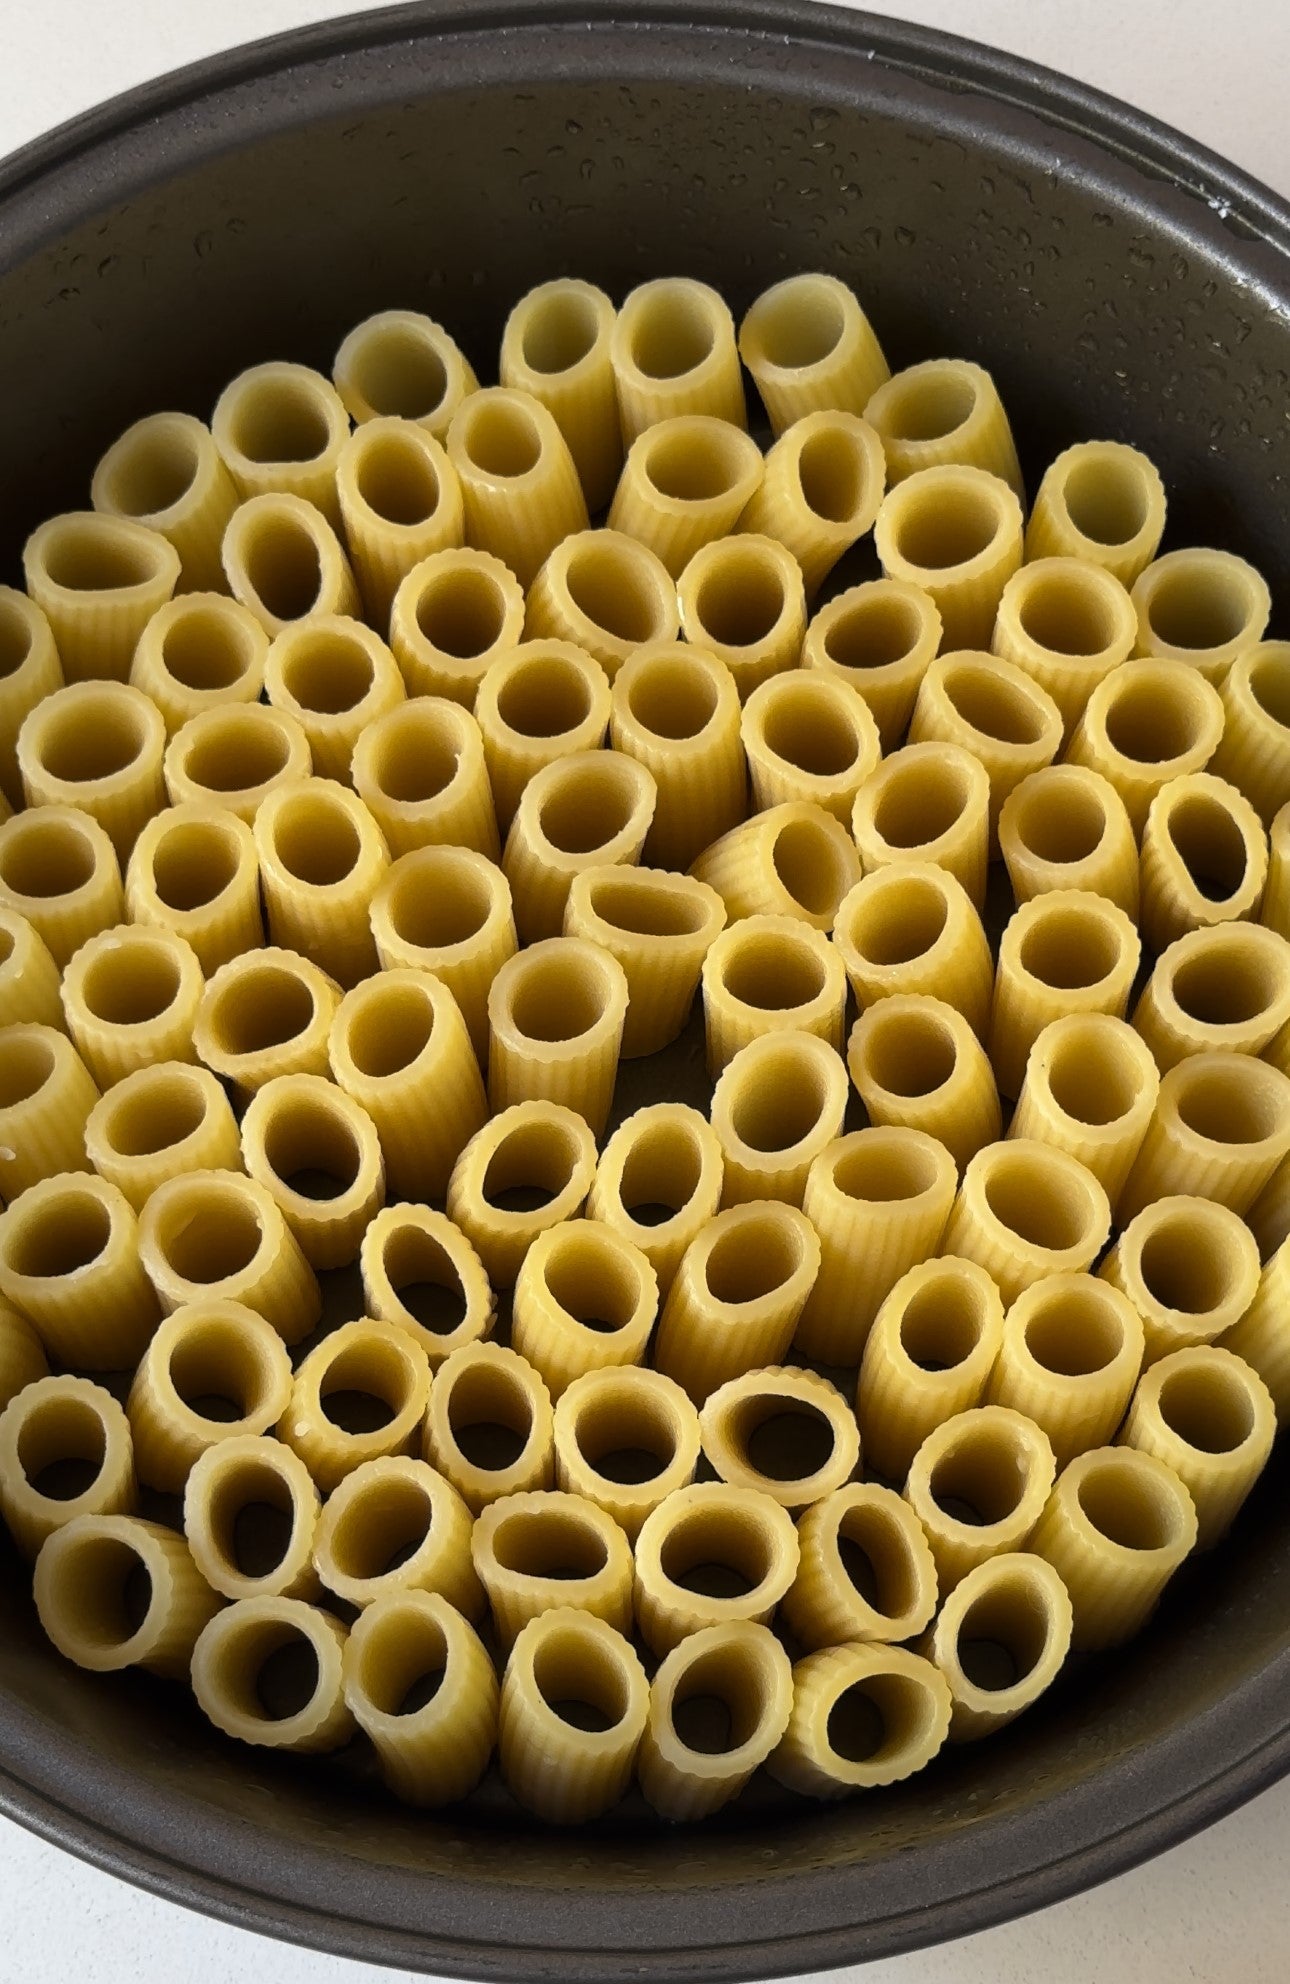 Top down view of pasta for pasta bake recipe